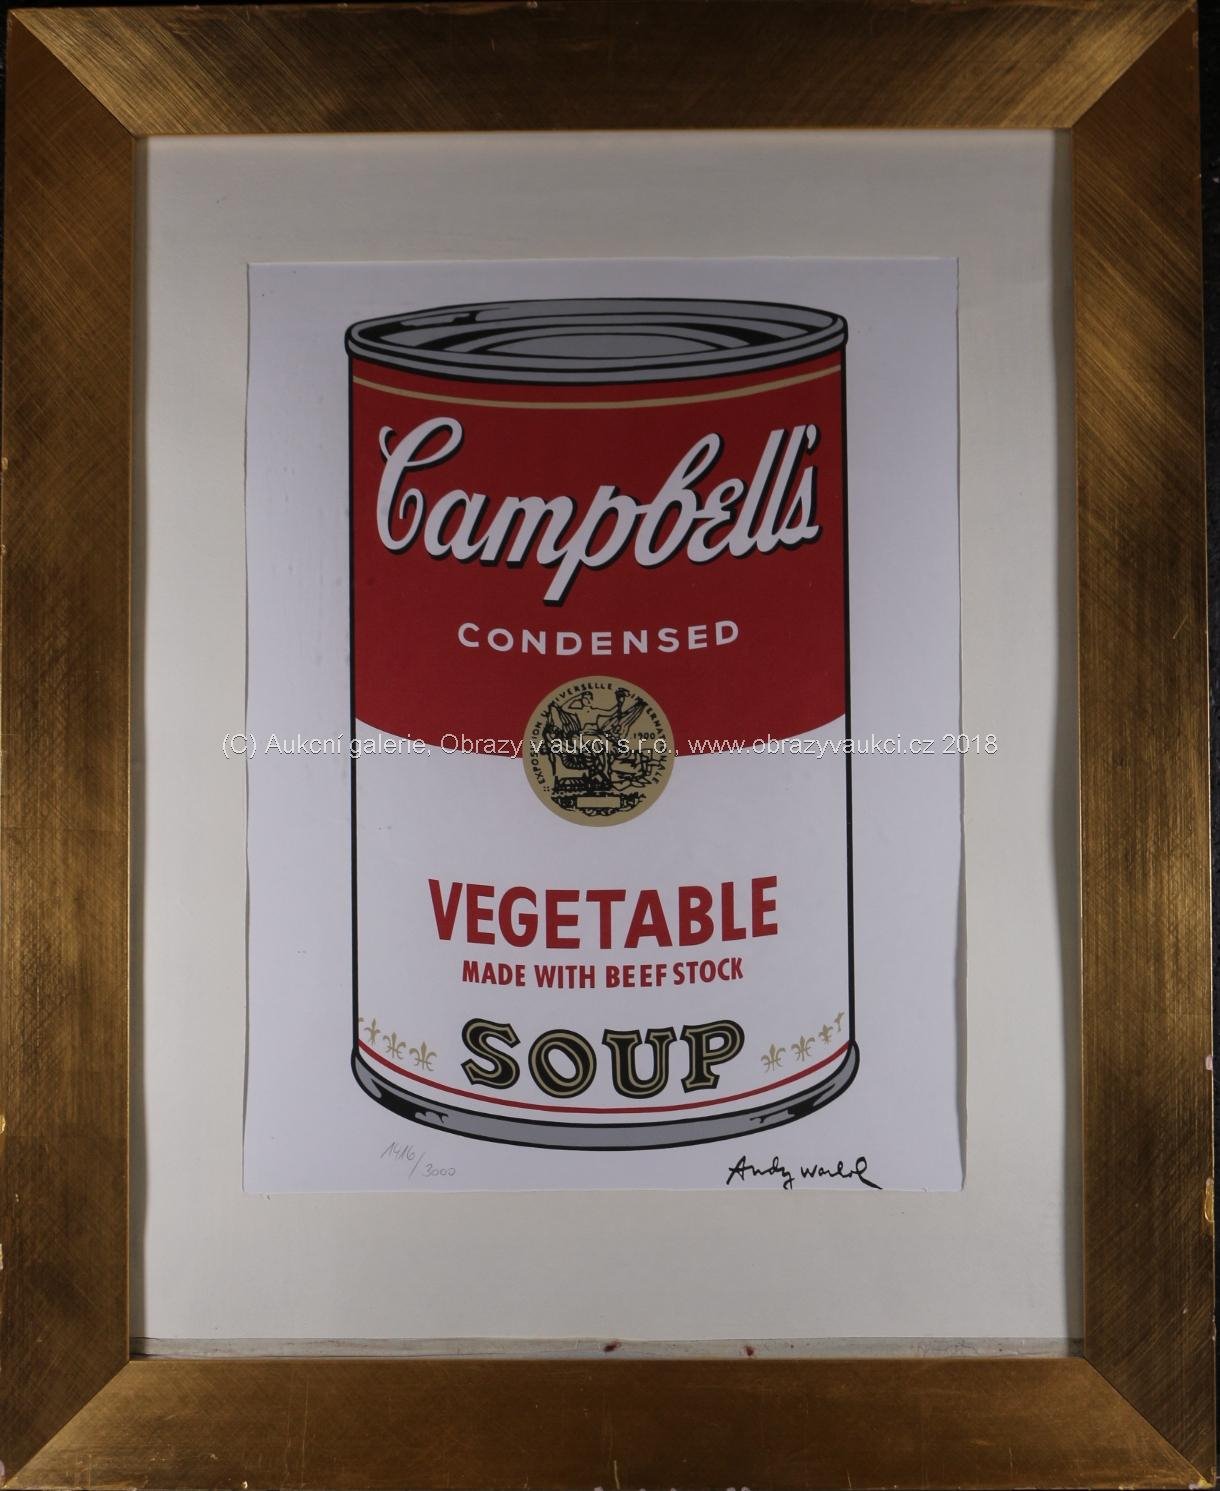 Andy Warhol - Campbell's Vegetable Soup